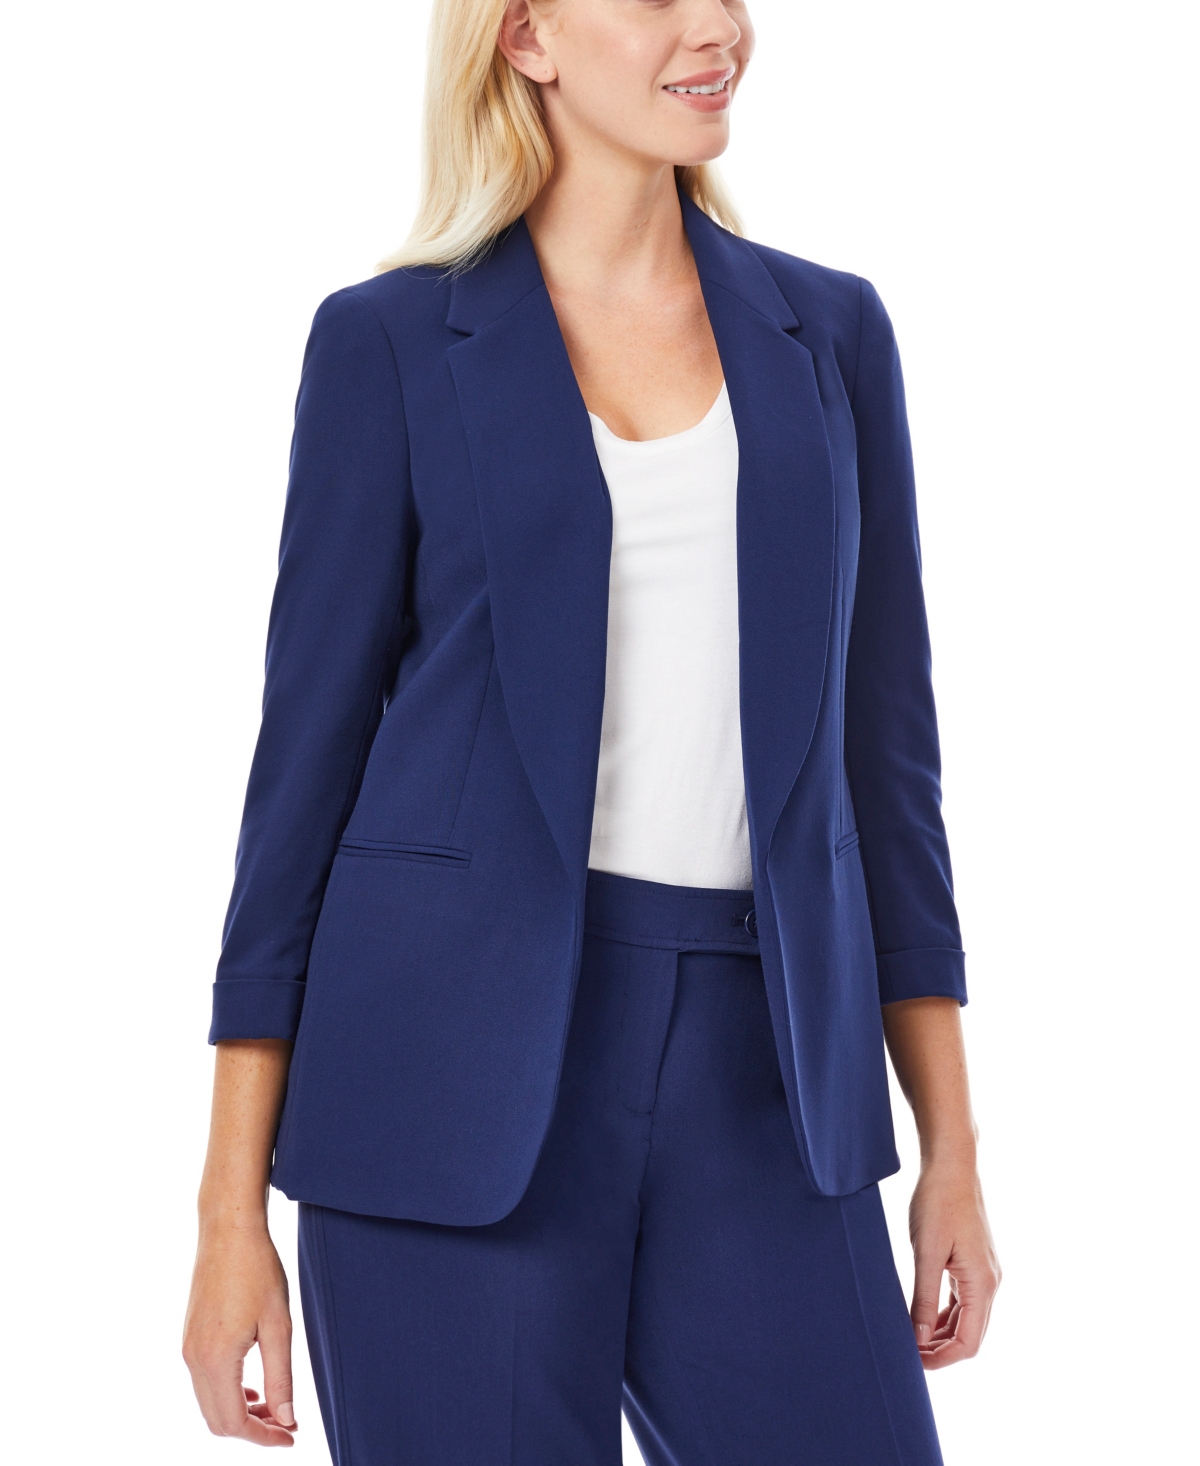 Jones New York Women's Notched Collar Jacket with Rolled Sleeves